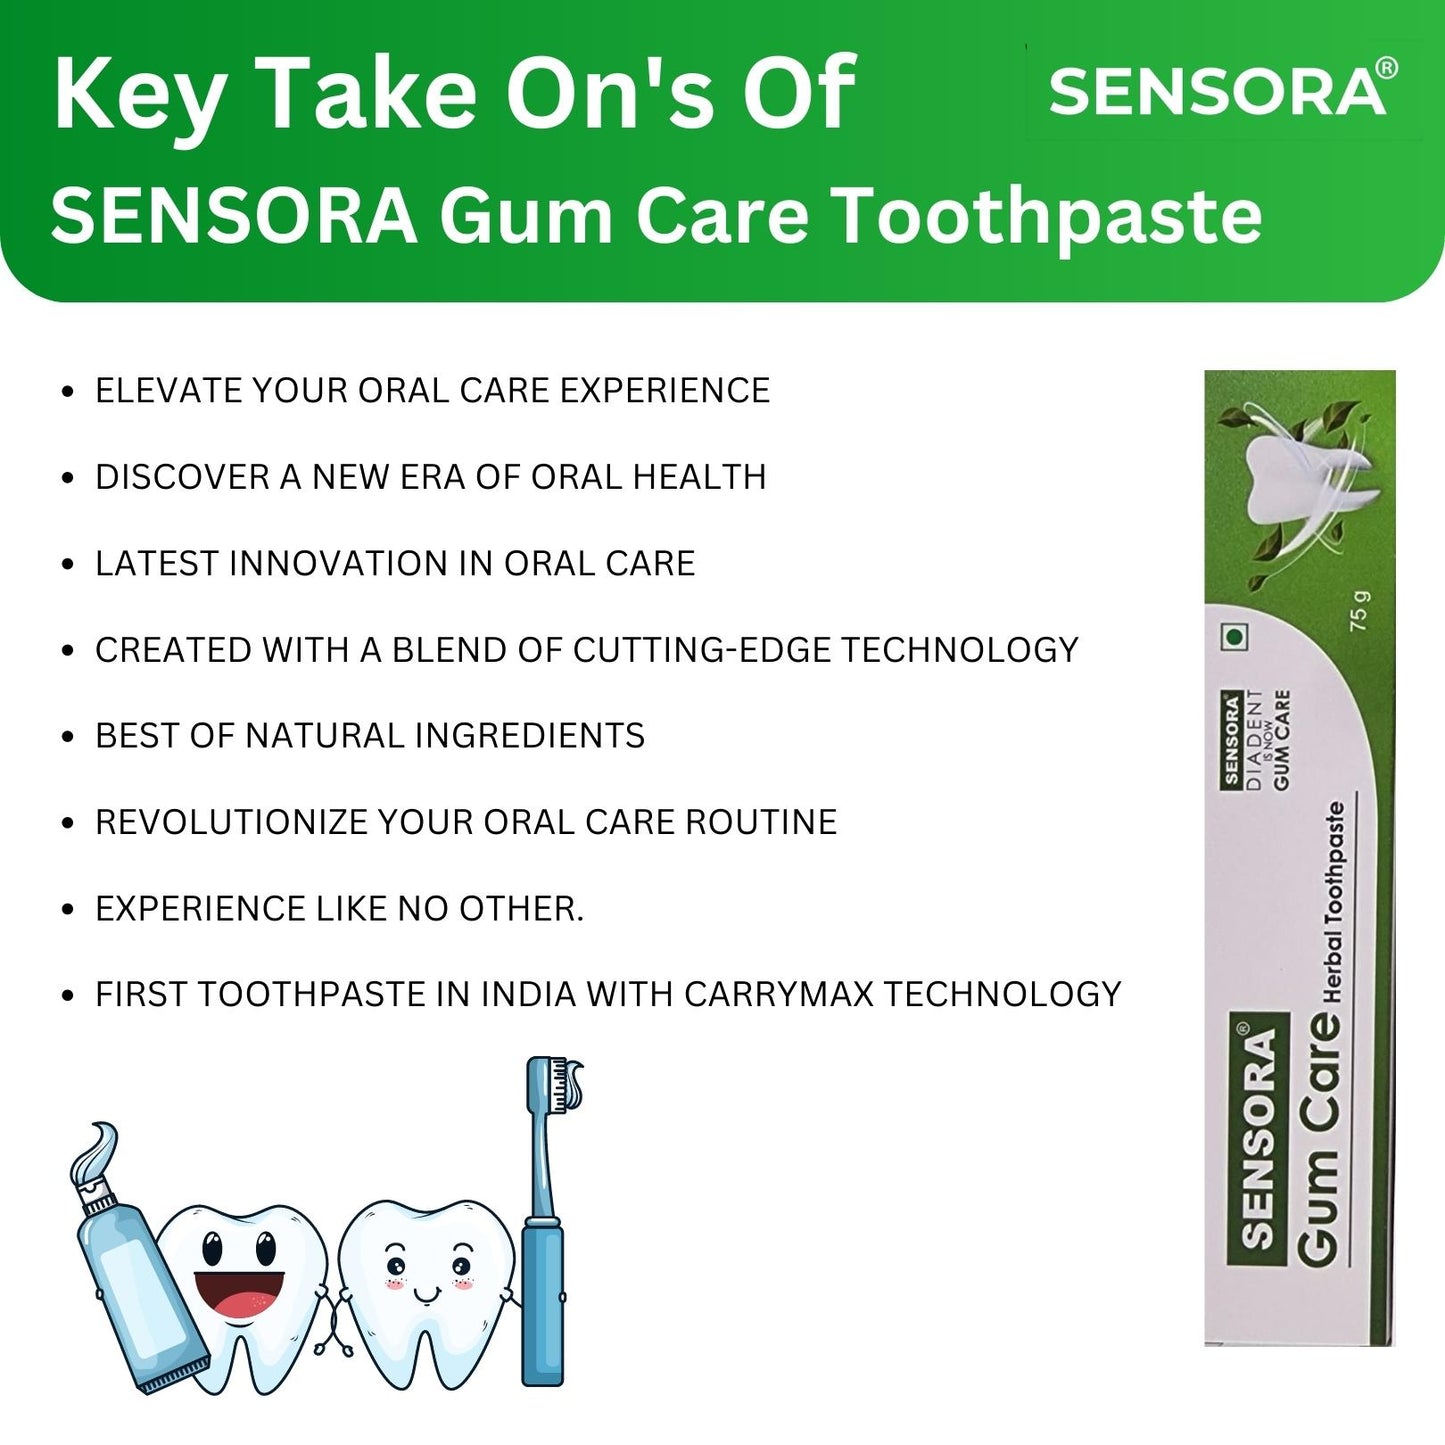 6+10 OFFER. SENSORA Gum Care Toothpaste - Pack of 6 and FREE 6 Super soft Toothbrushes and 4 tongue cleaners